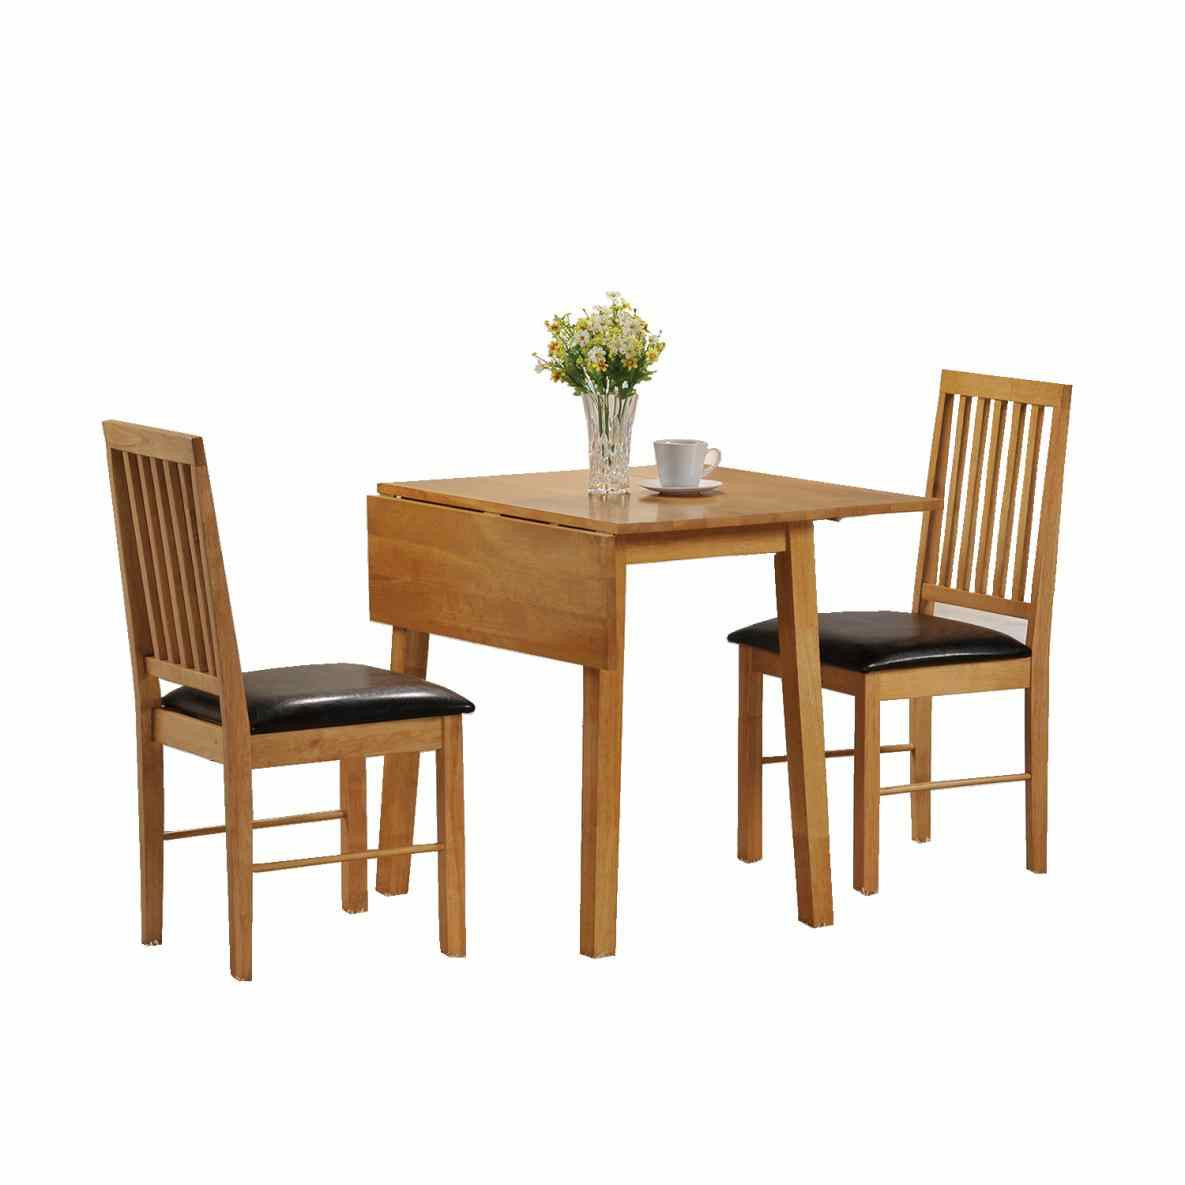 Small Kitchen Tables For Two
 small kitchen tables with 2 chairs